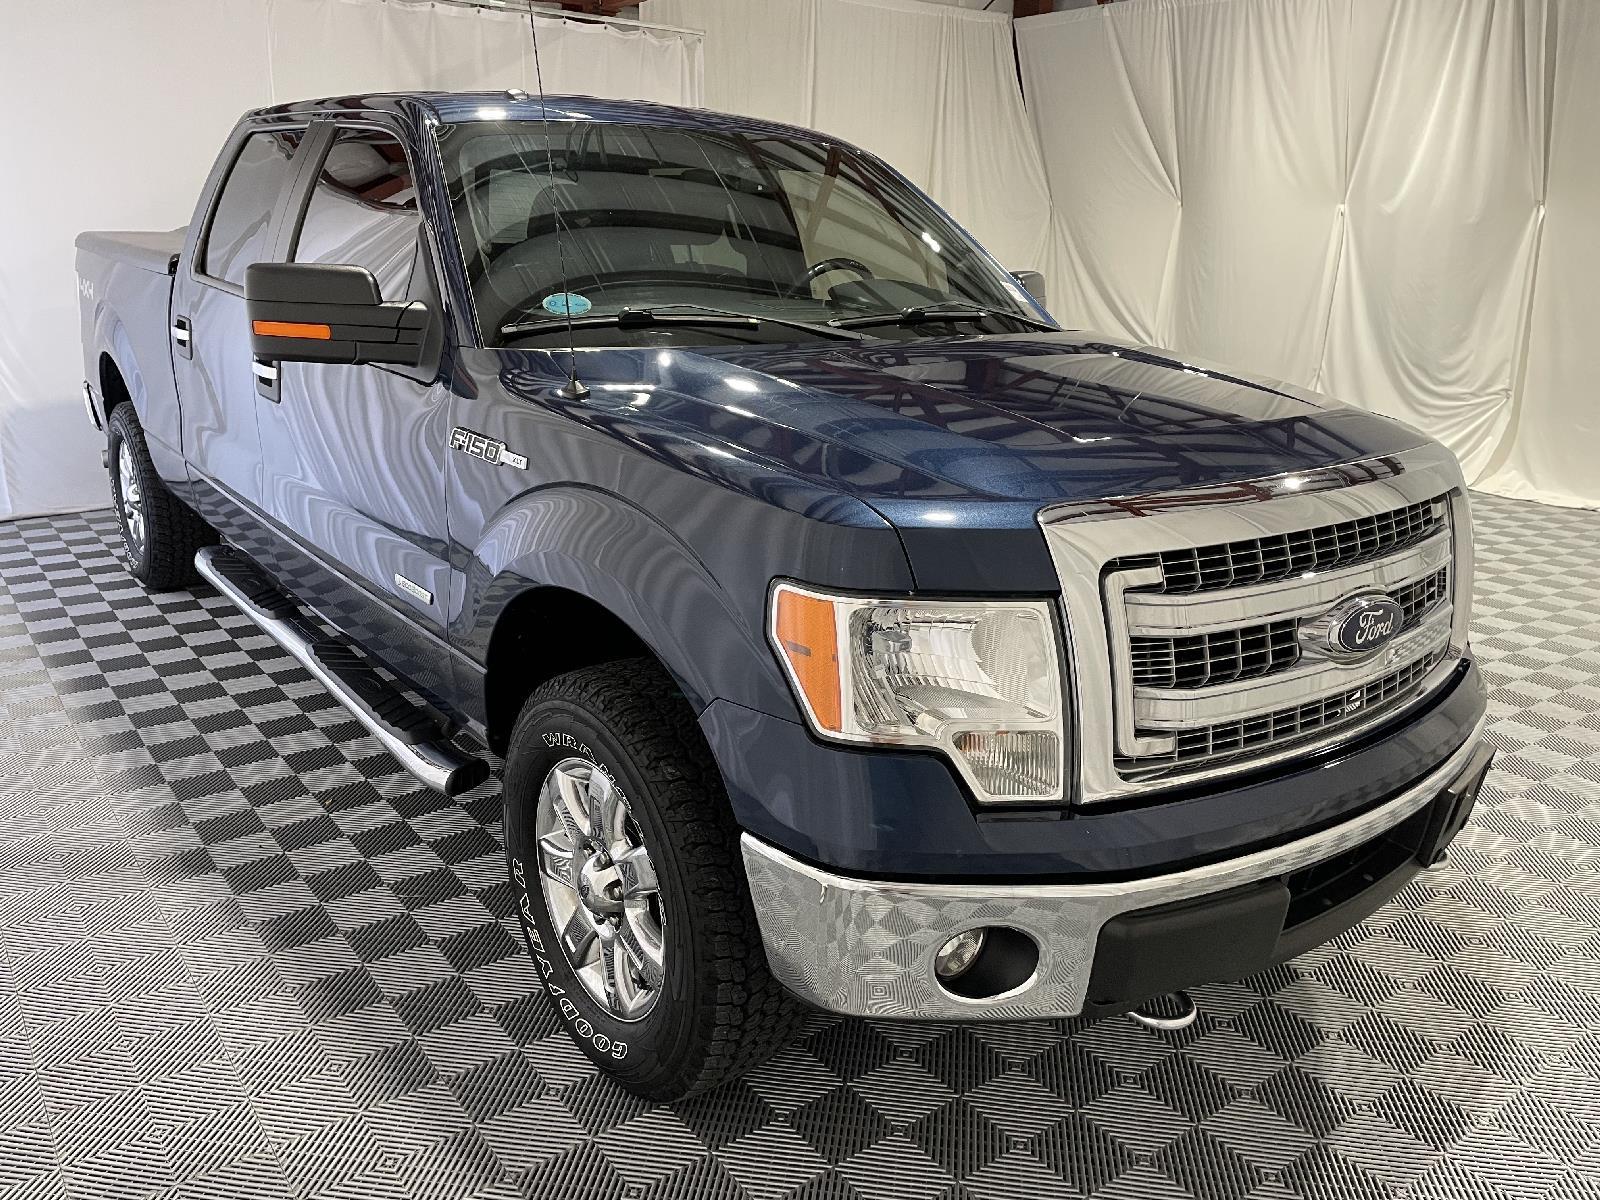 Used 2014 Ford F-150 XLT Crew Cab Truck for sale in St Joseph MO